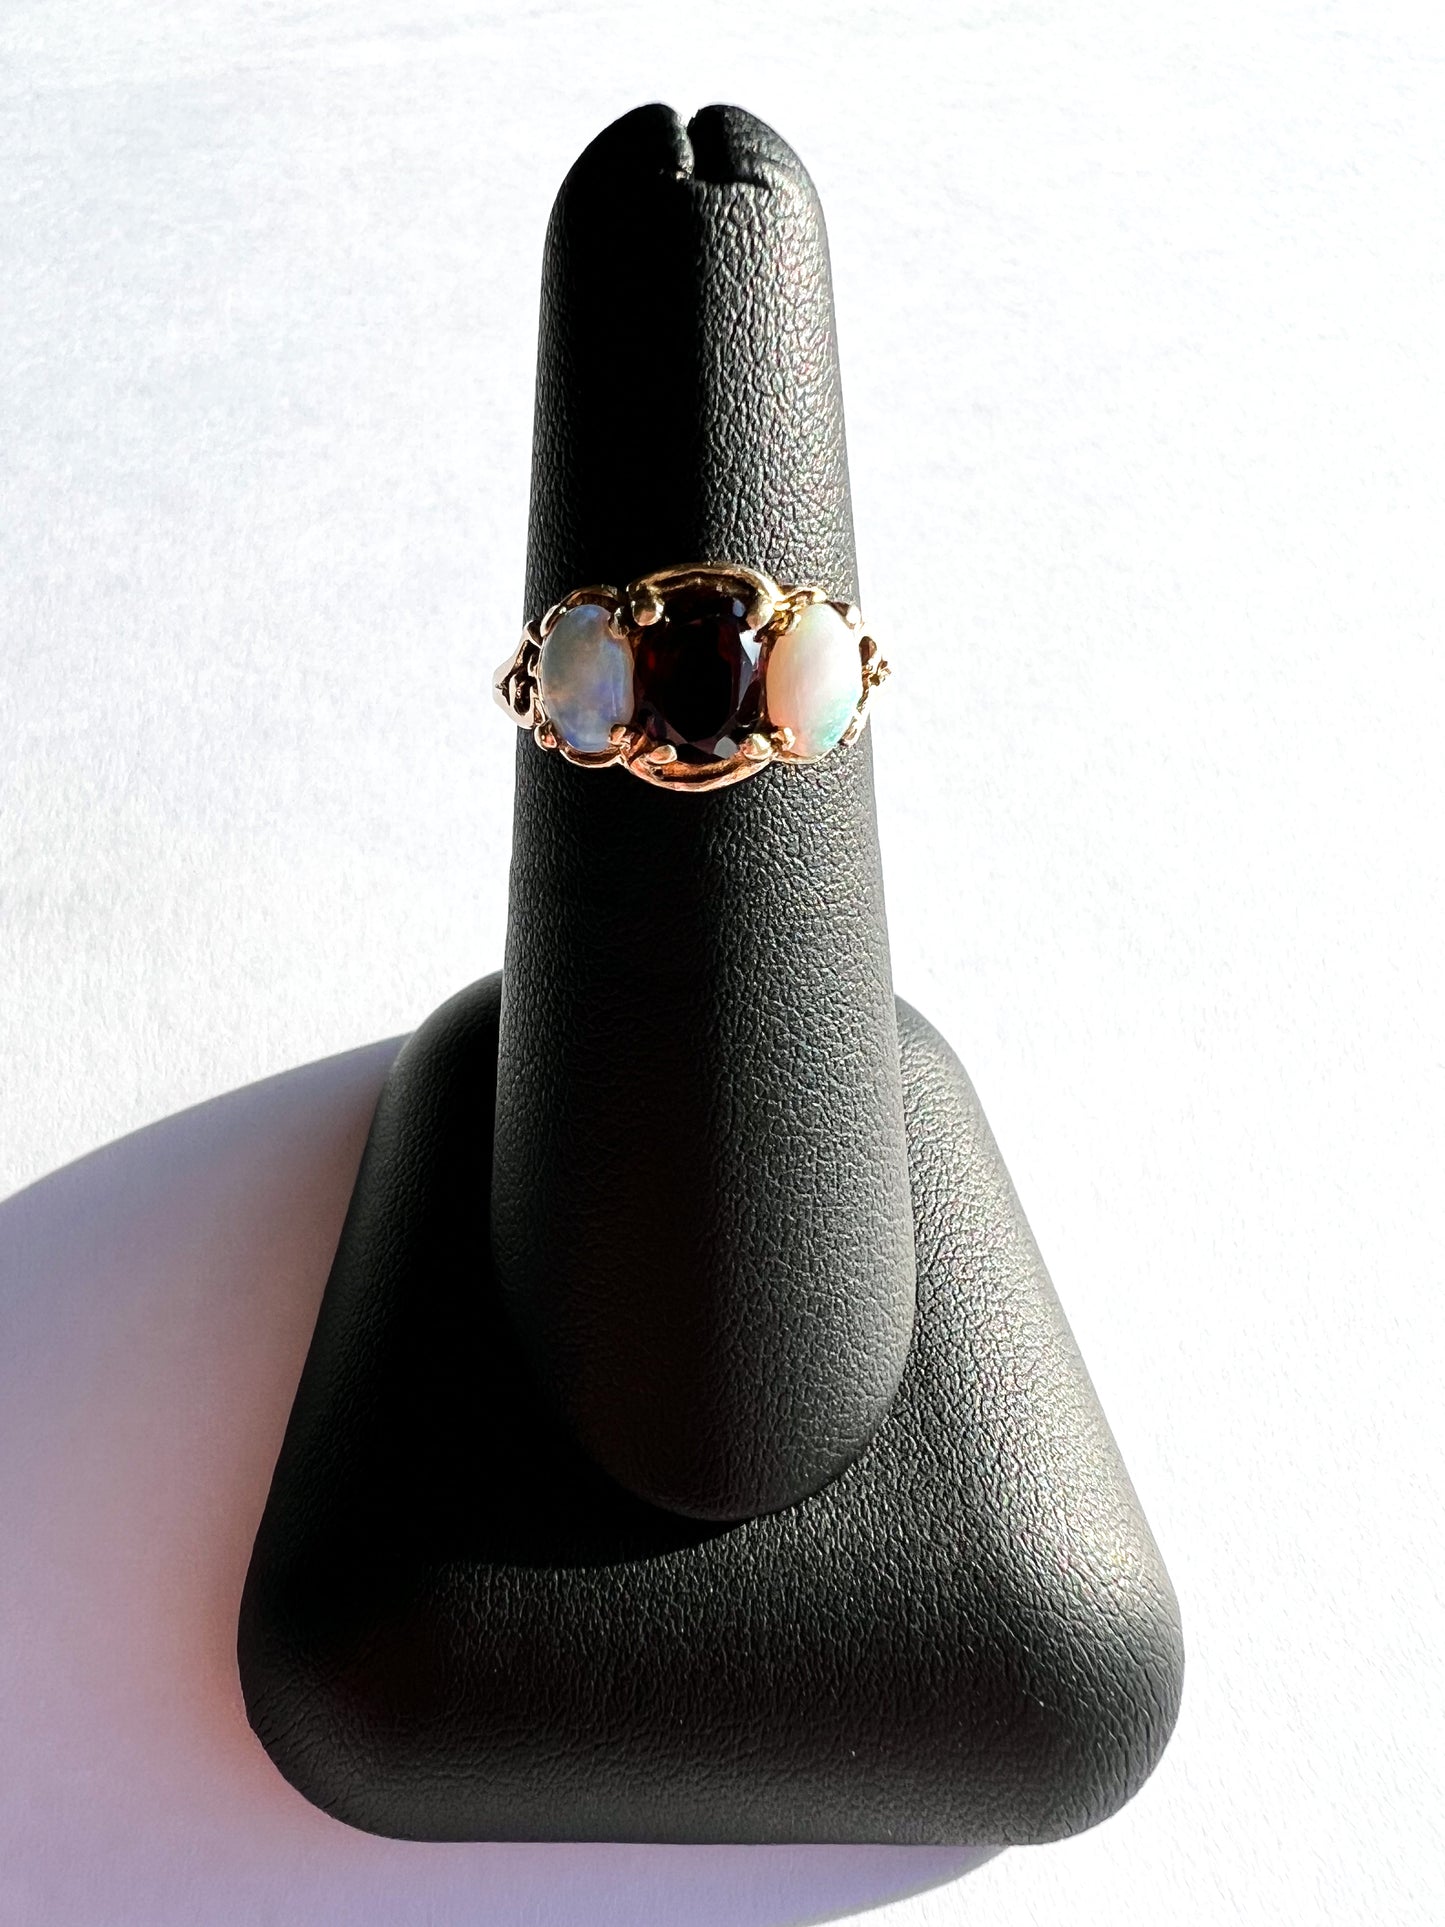 Vintage Yellow Gold Garnet and Opal Ring